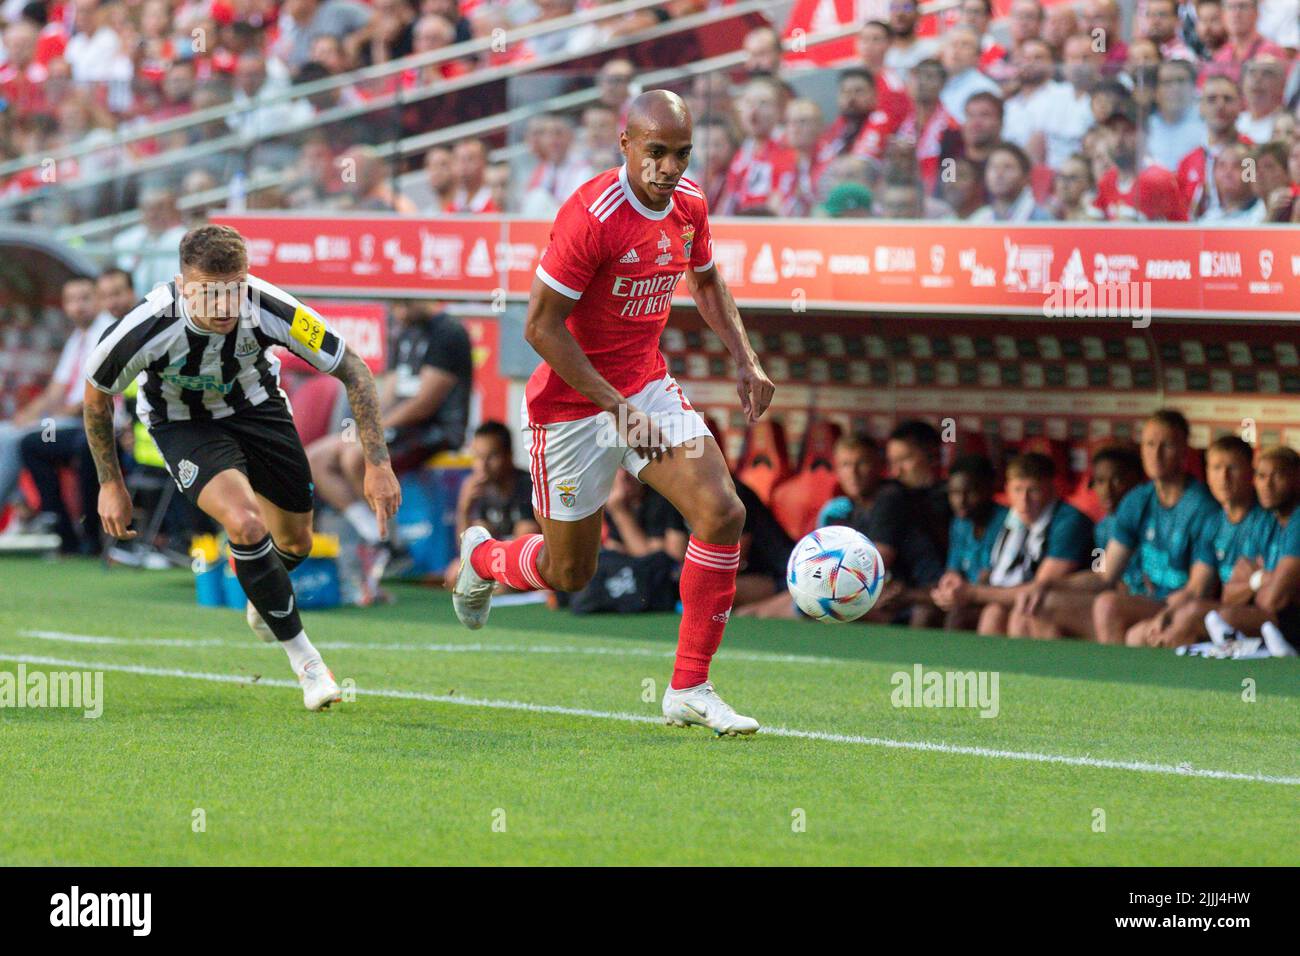 Lisbon, Portugal. July 26, 2022.  Benfica's midfielder from Portugal Joao Mario (20) in action during the friendly game between SL Benfica vs Newcastle United FC Credit: Alexandre de Sousa/Alamy Live News Stock Photo